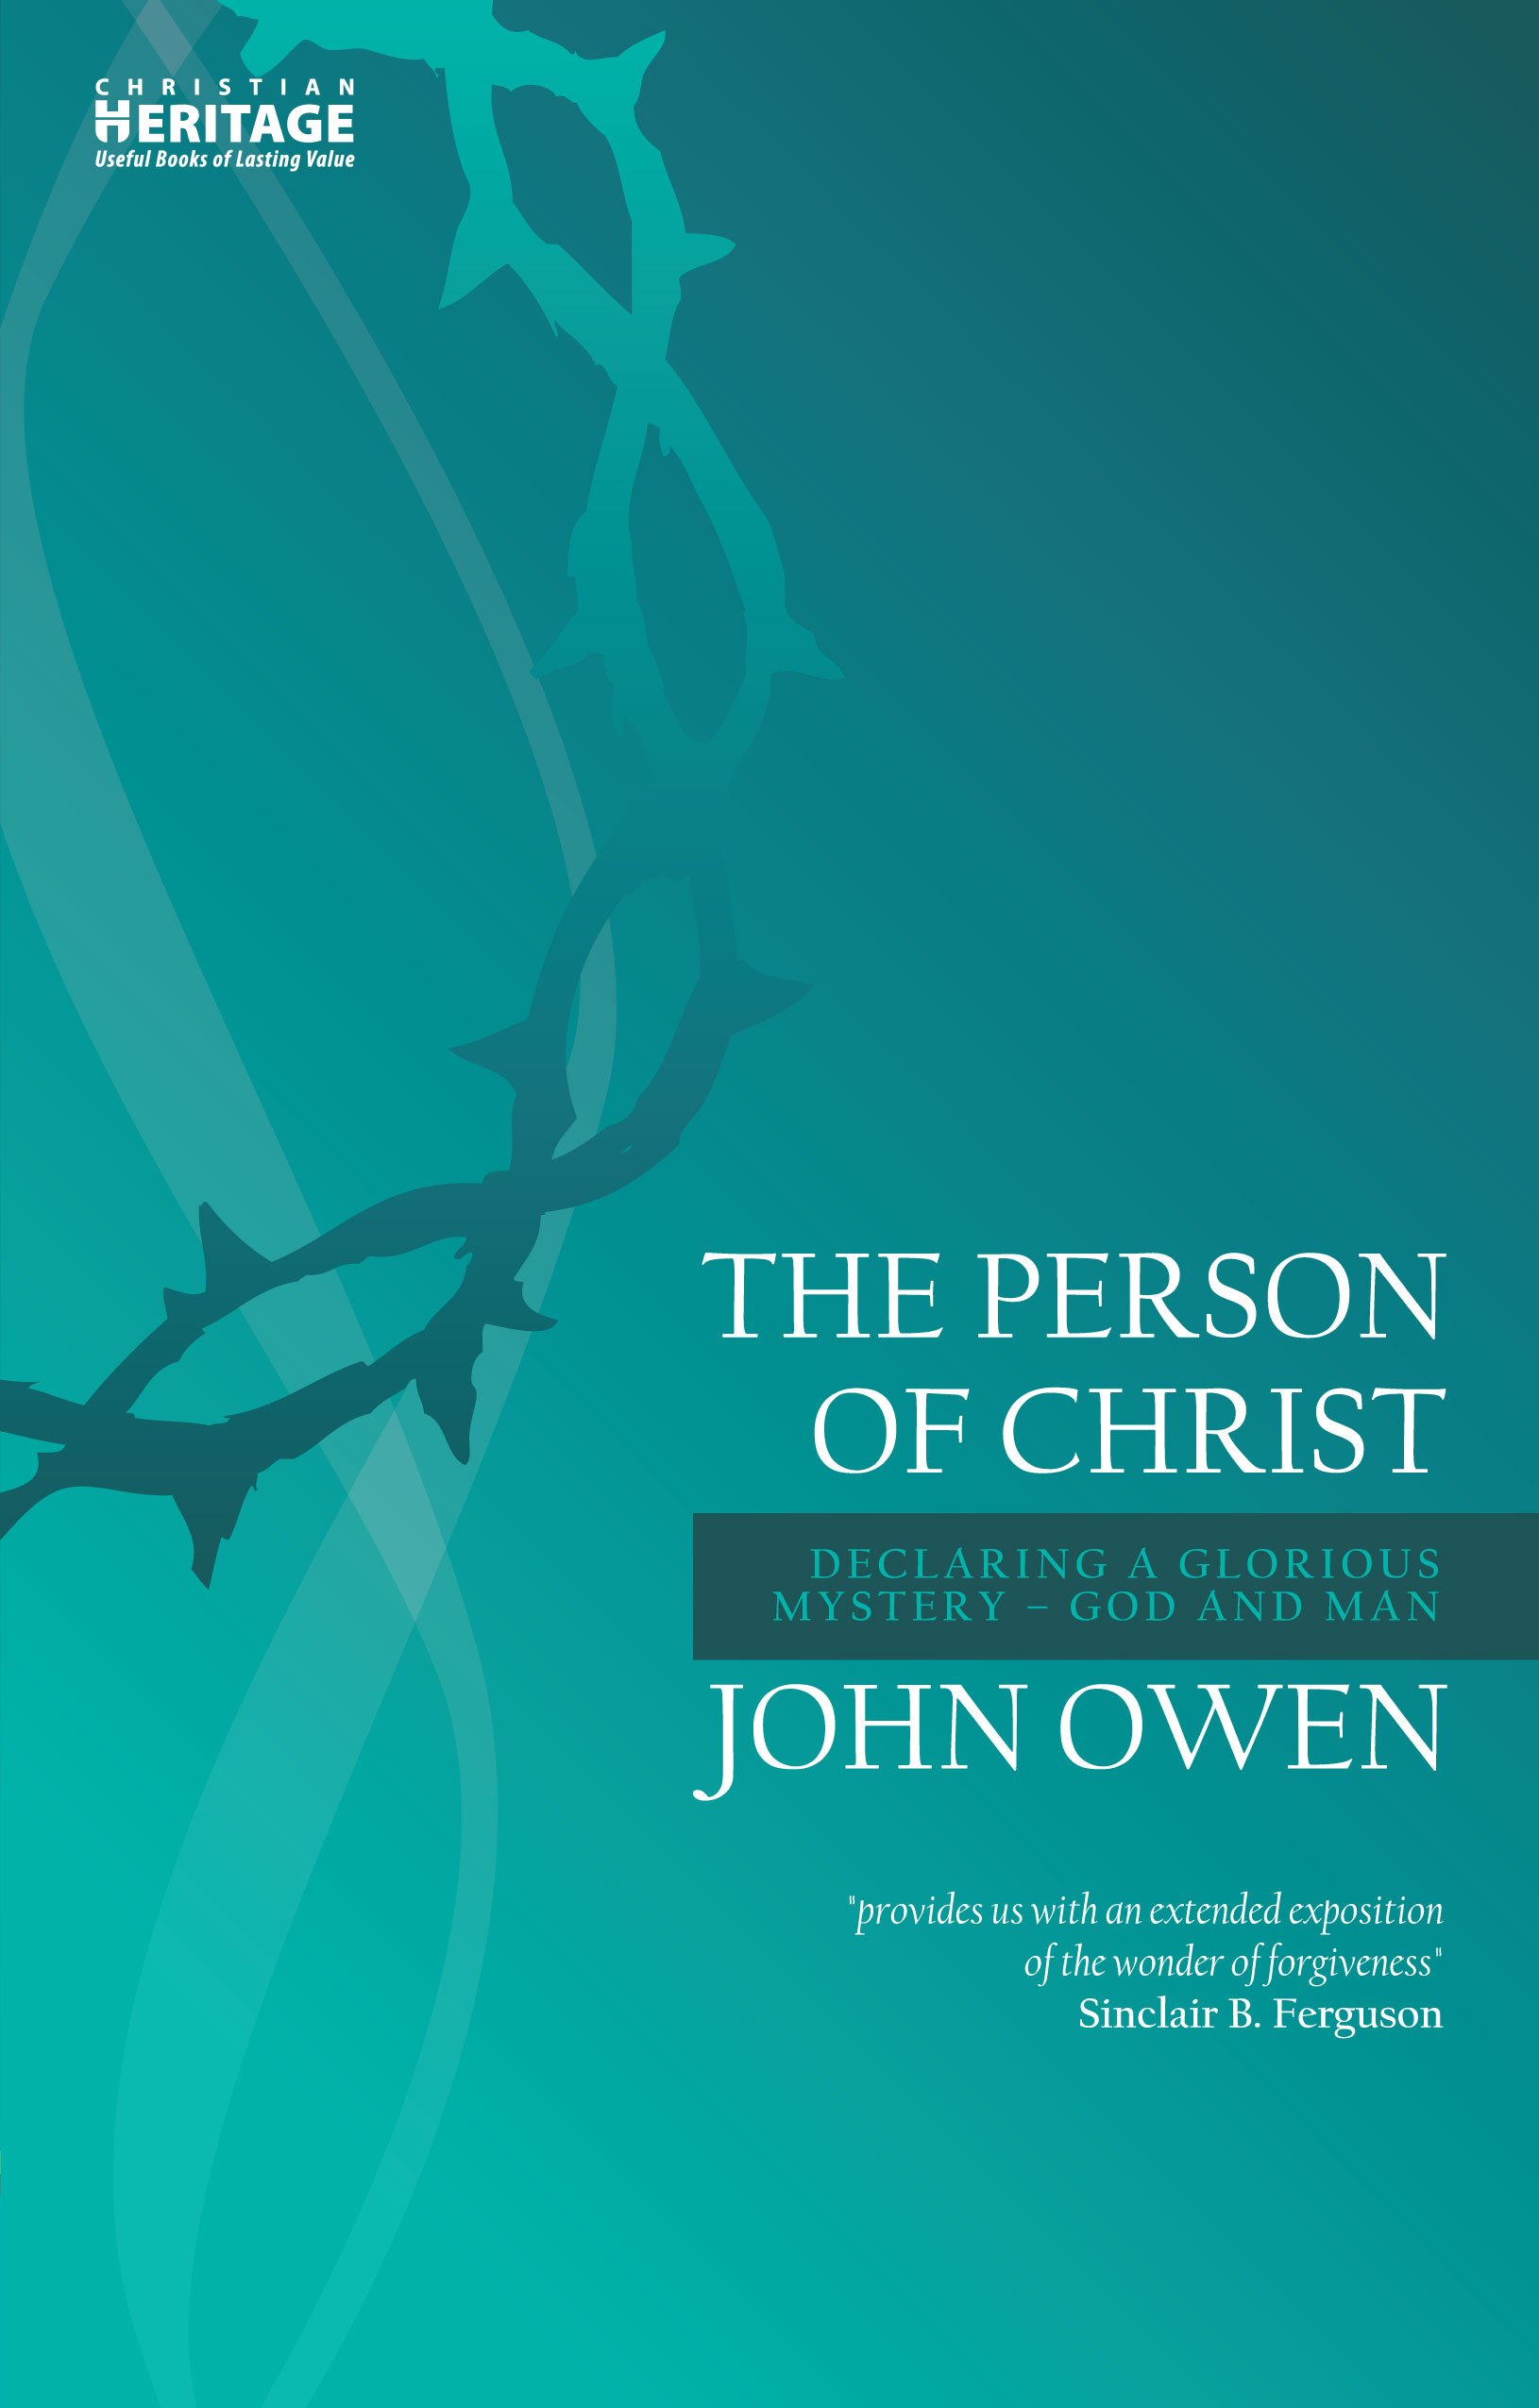 THE PERSON OF CHRIST, by John Owen